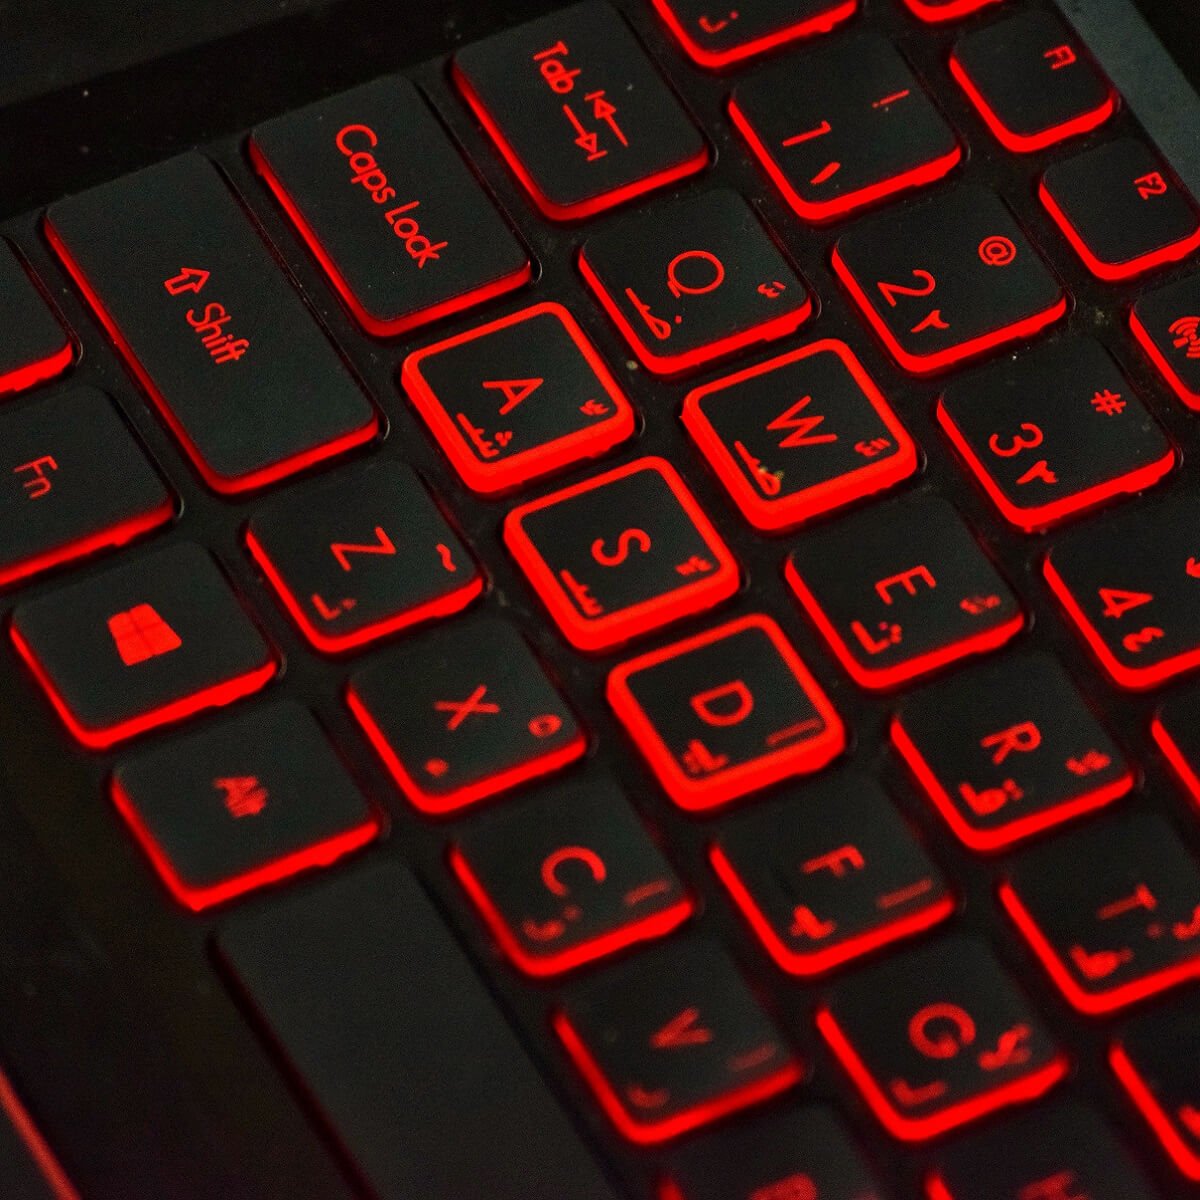 Windows 10 switches keyboard language on its own [QUICK GUIDE]